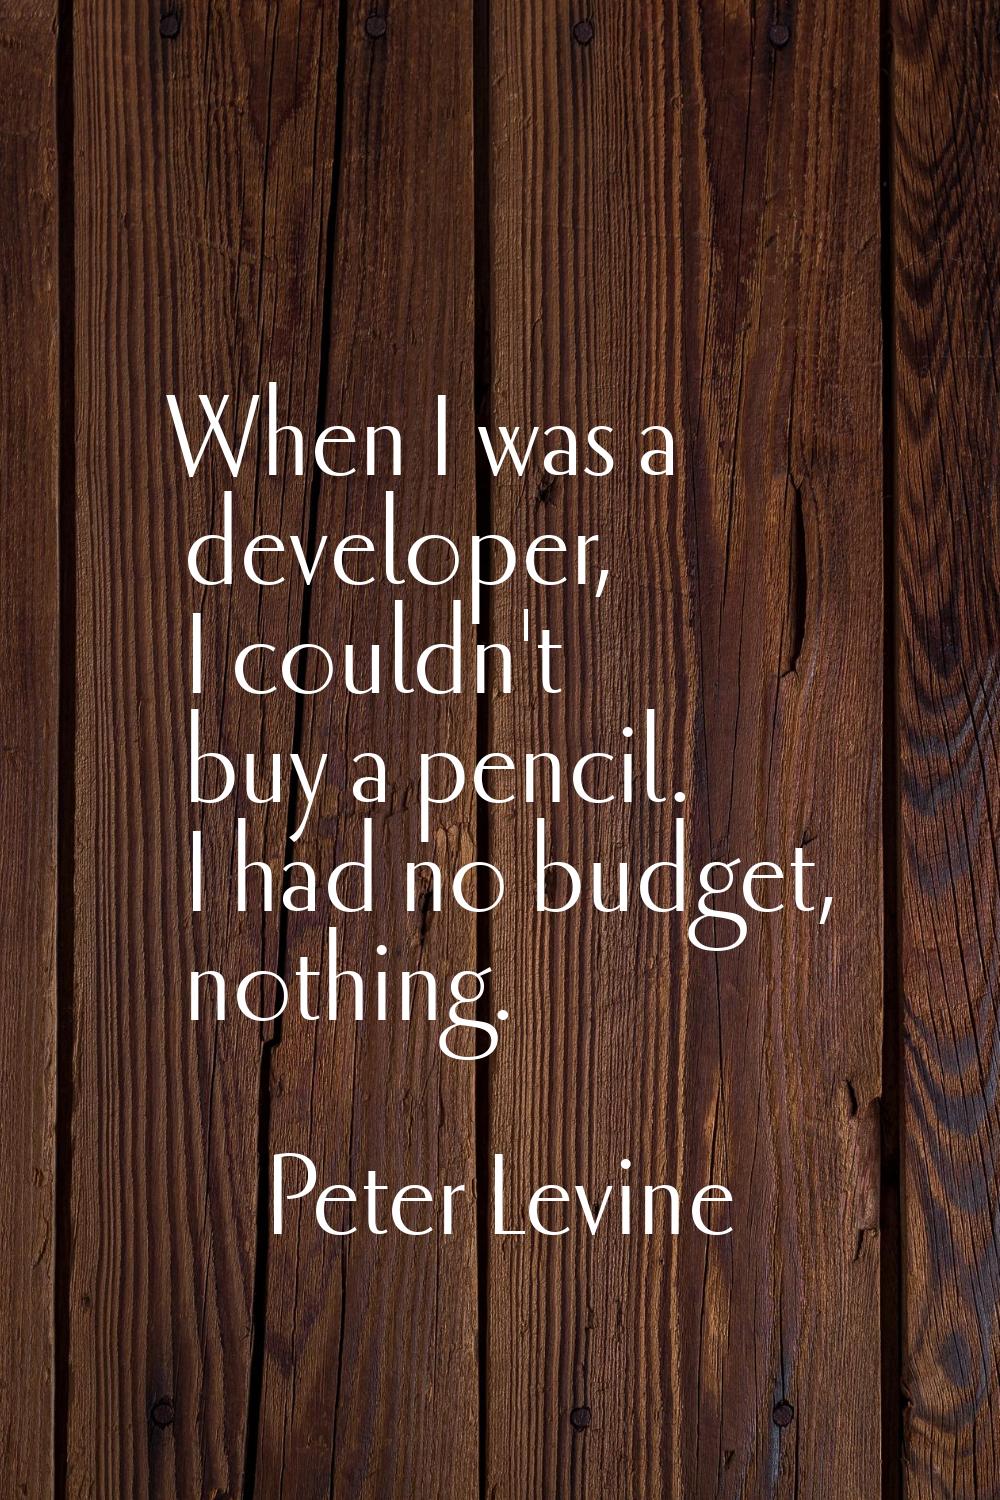 When I was a developer, I couldn't buy a pencil. I had no budget, nothing.